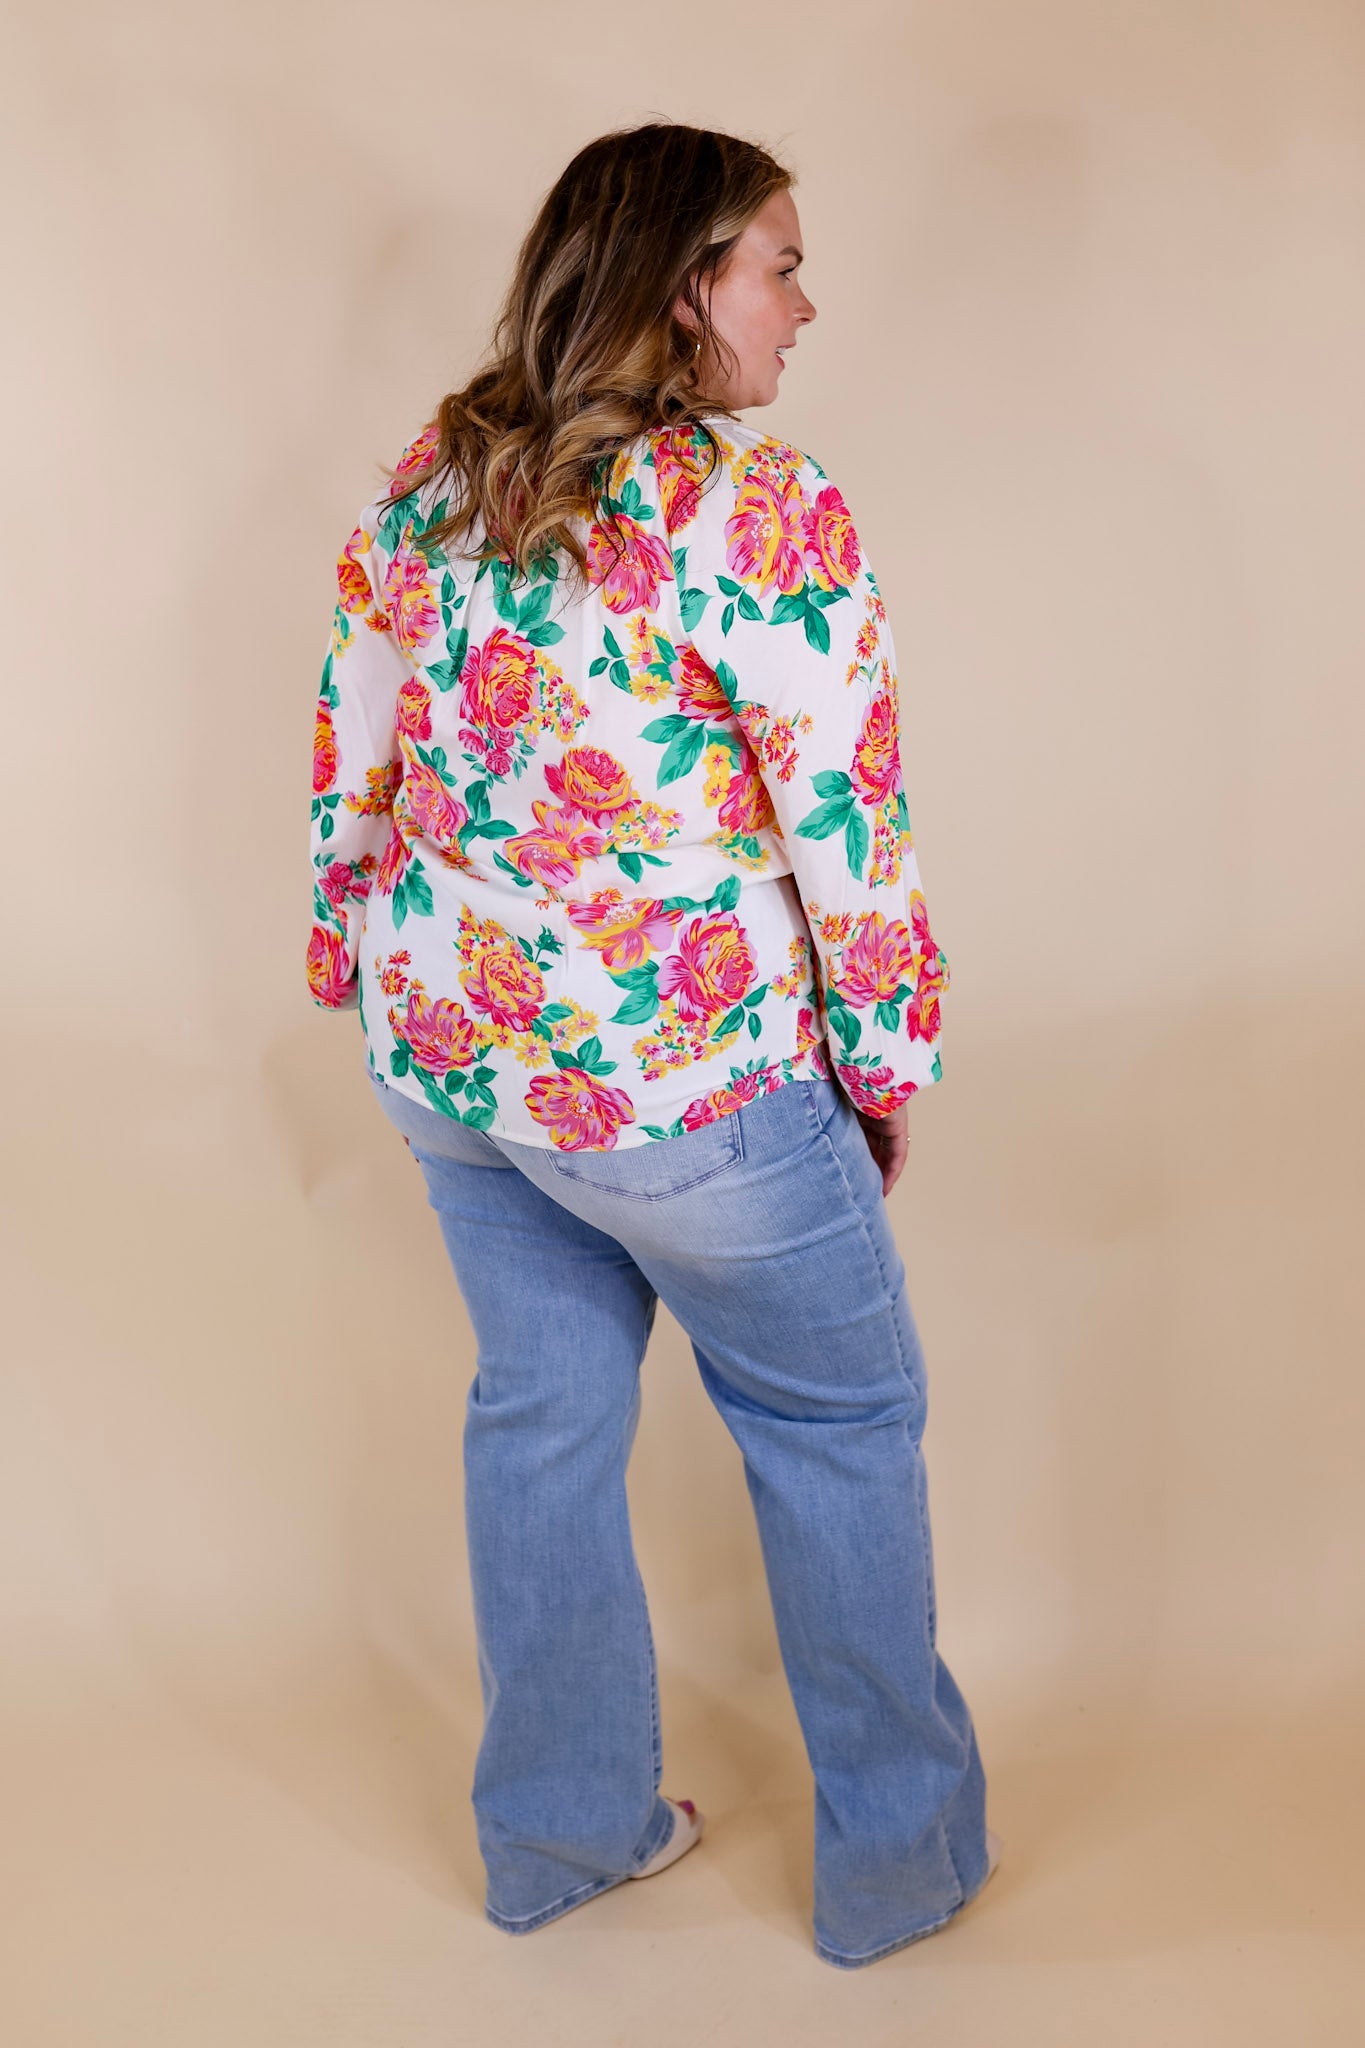 Follow Your Happiness Notched V Neck Floral Top with Long Sleeves in White - Giddy Up Glamour Boutique